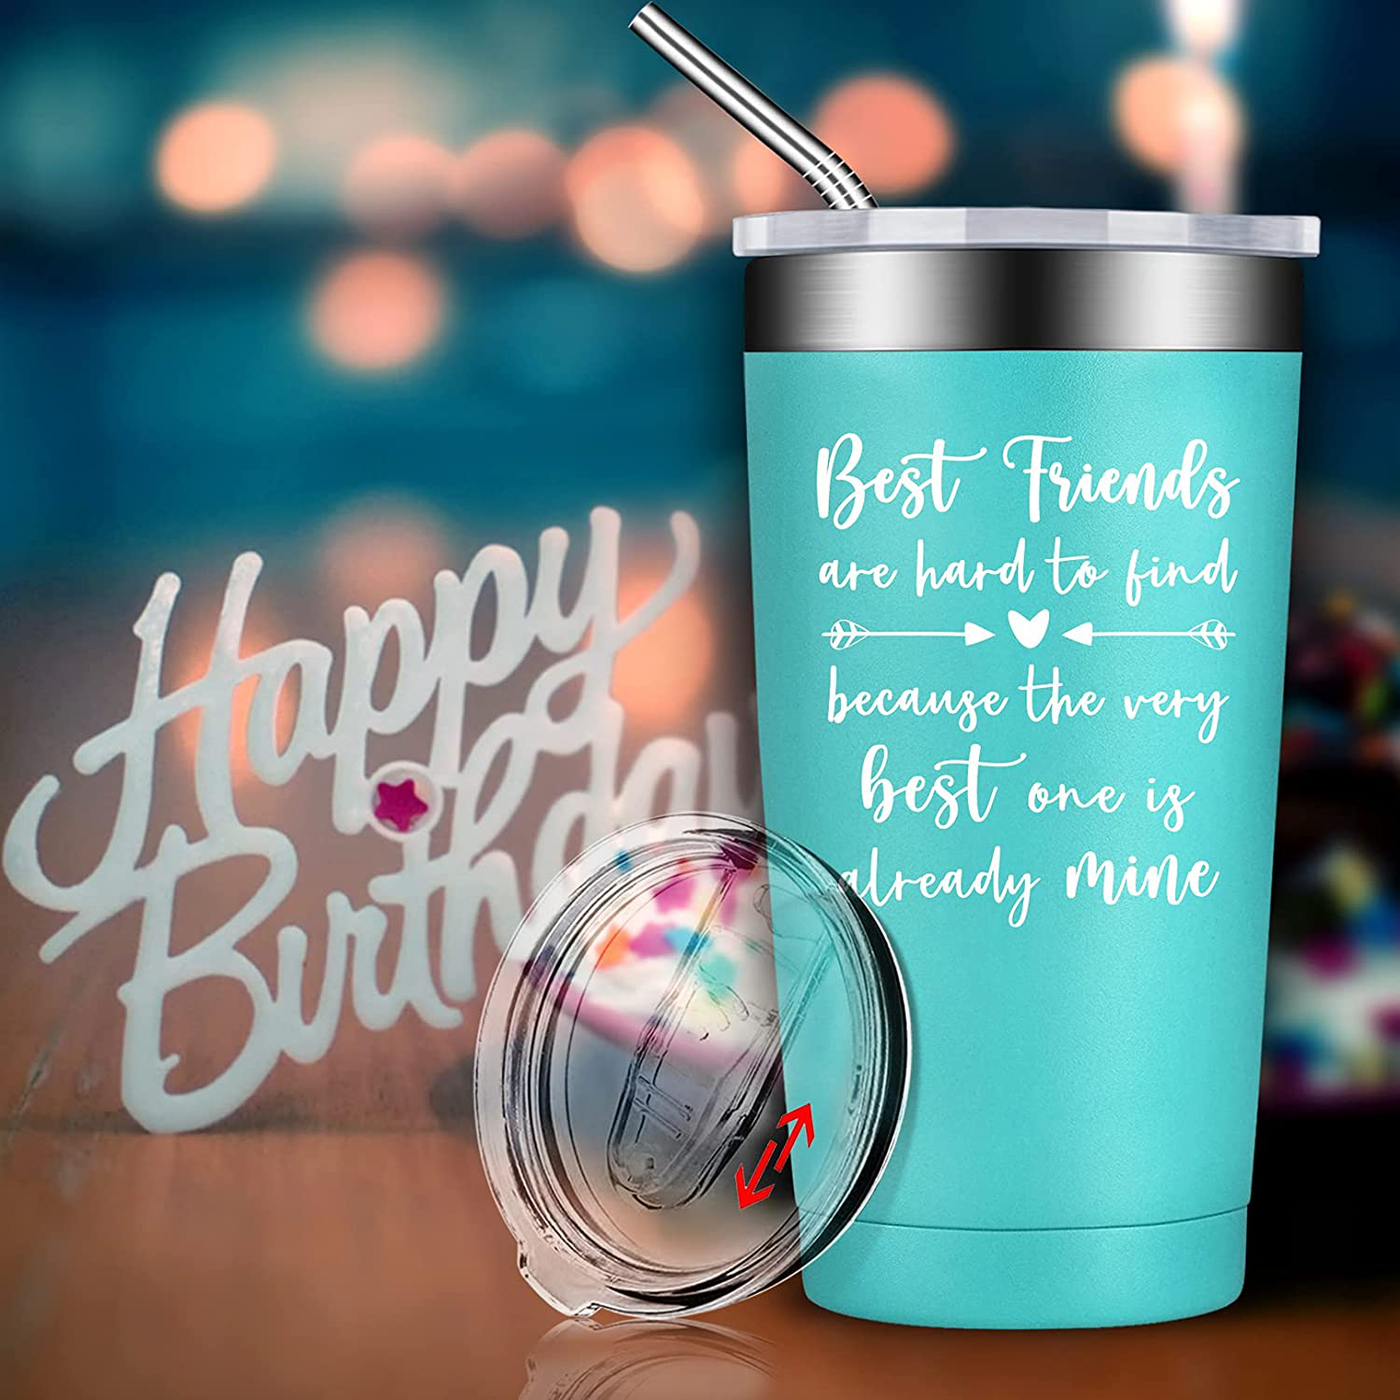 BIRGILT Best Friend Gift for Women - Gifts for Best Friends - Funny Friendship Birthday Gifts for Friend Female, Bff, Coworker, Sister, Woman, Her - 20oz Friend Tumbler Cups with Straw